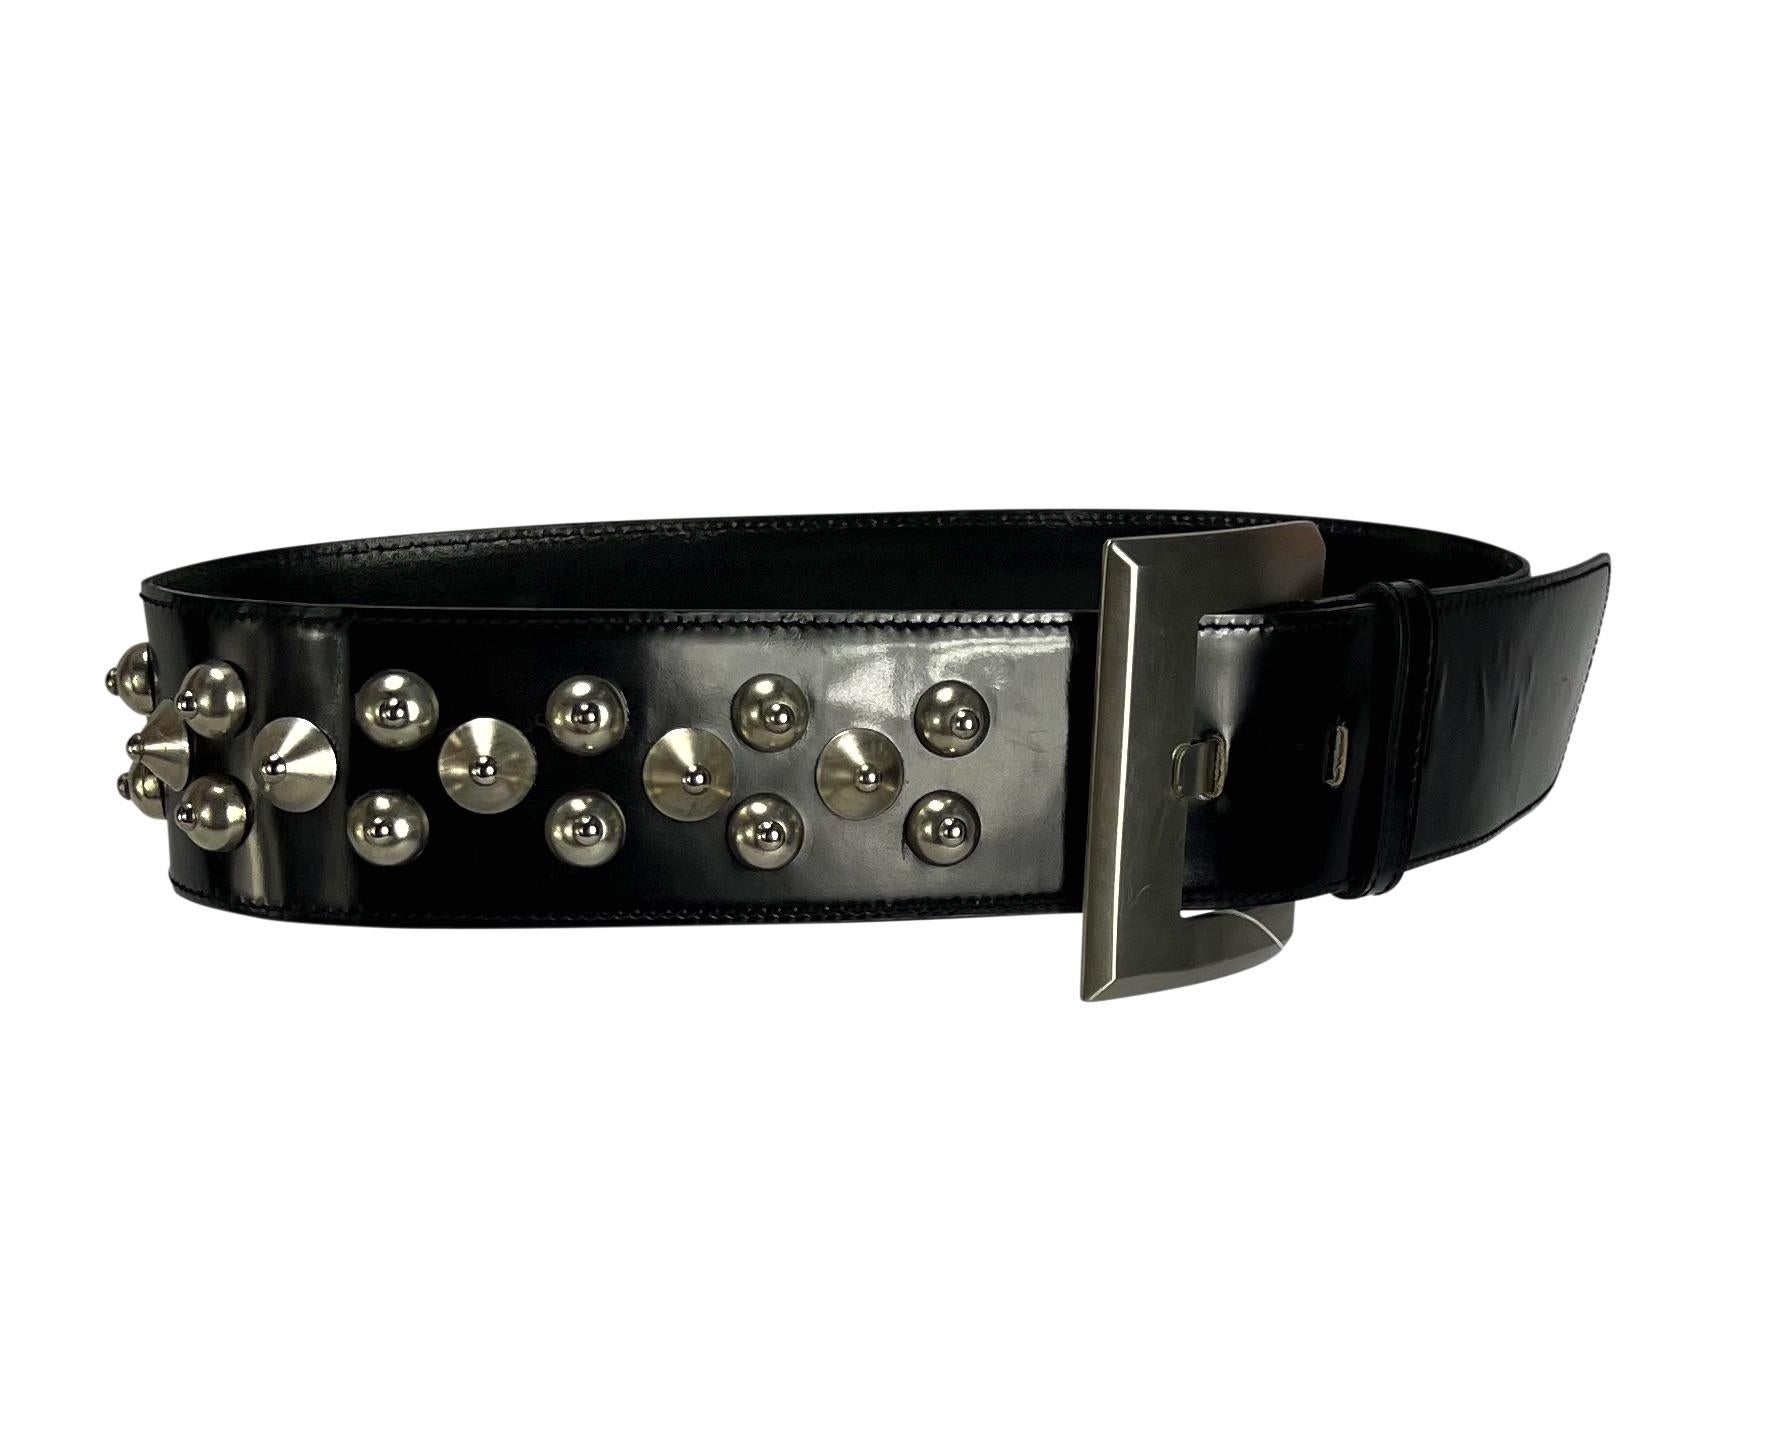 Presenting a fabulous black patent leather Gianni Versace belt, designed by Gianni Versace. From the late 1980s, this wide belt is made complete with a large angular silver-tone buckle and studs along the strap. Never worn before, this incredible